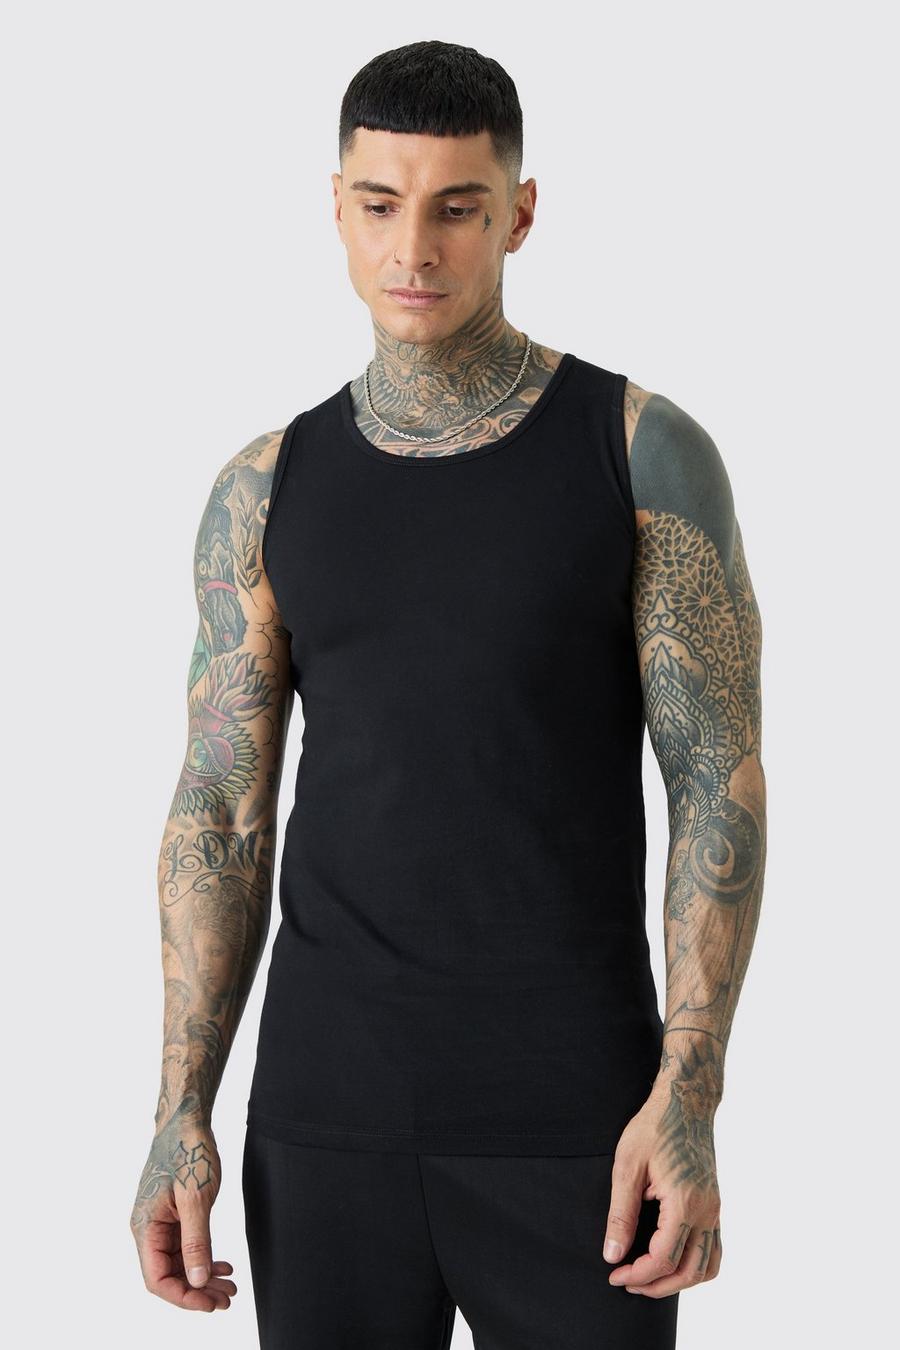 Black Tall Muscle Fit Tank Top